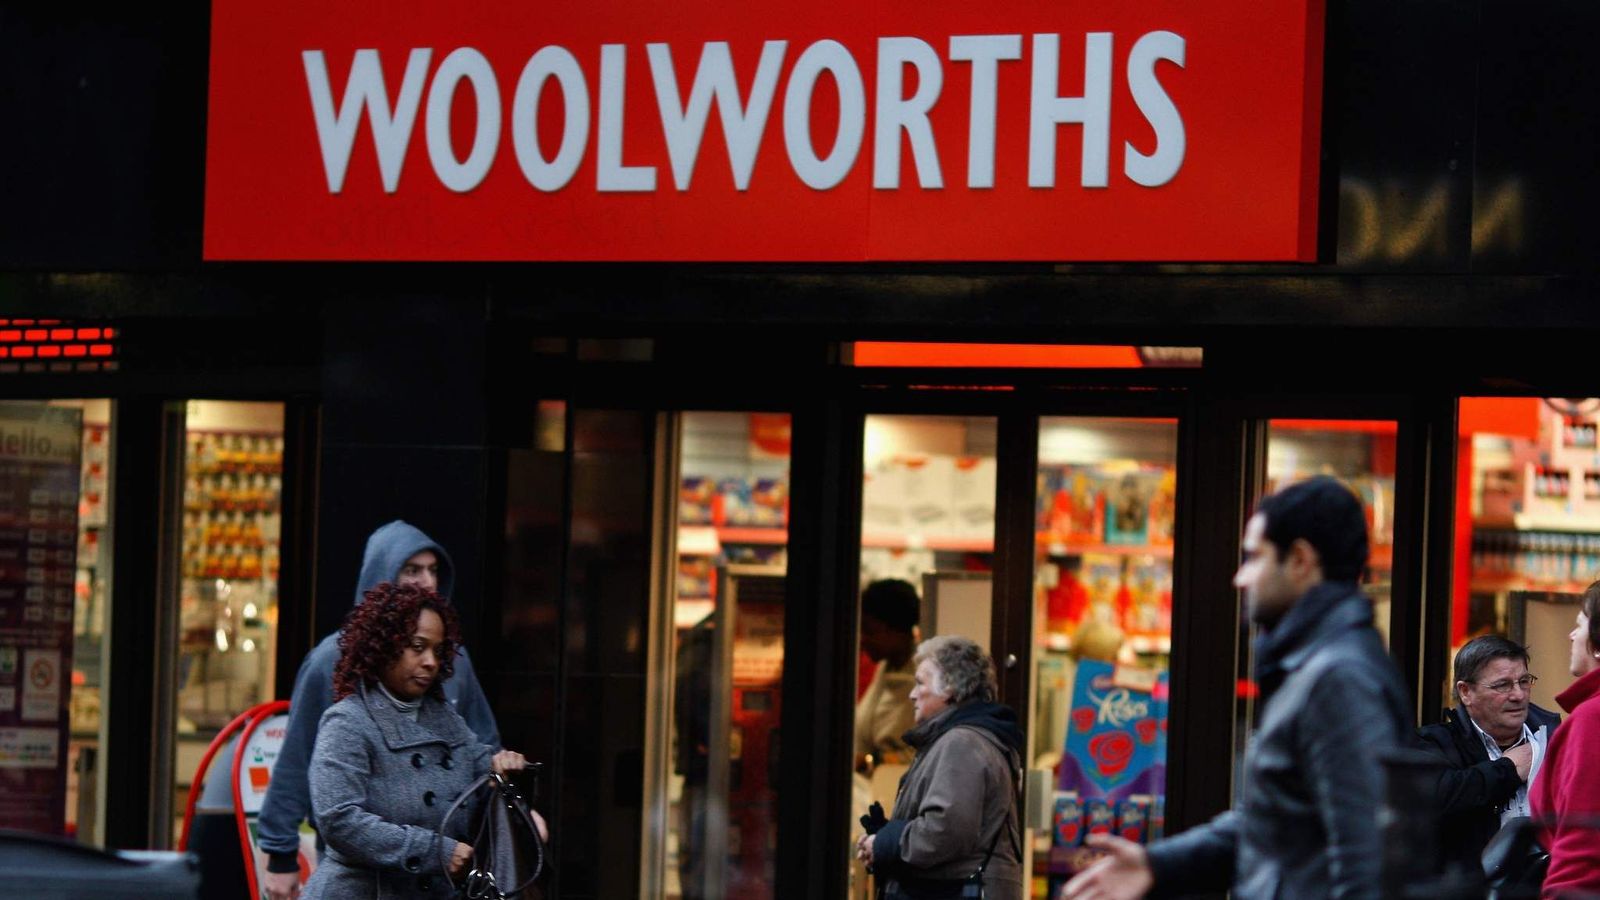 Woolworths demise 15 years on: What happened at the retail giant